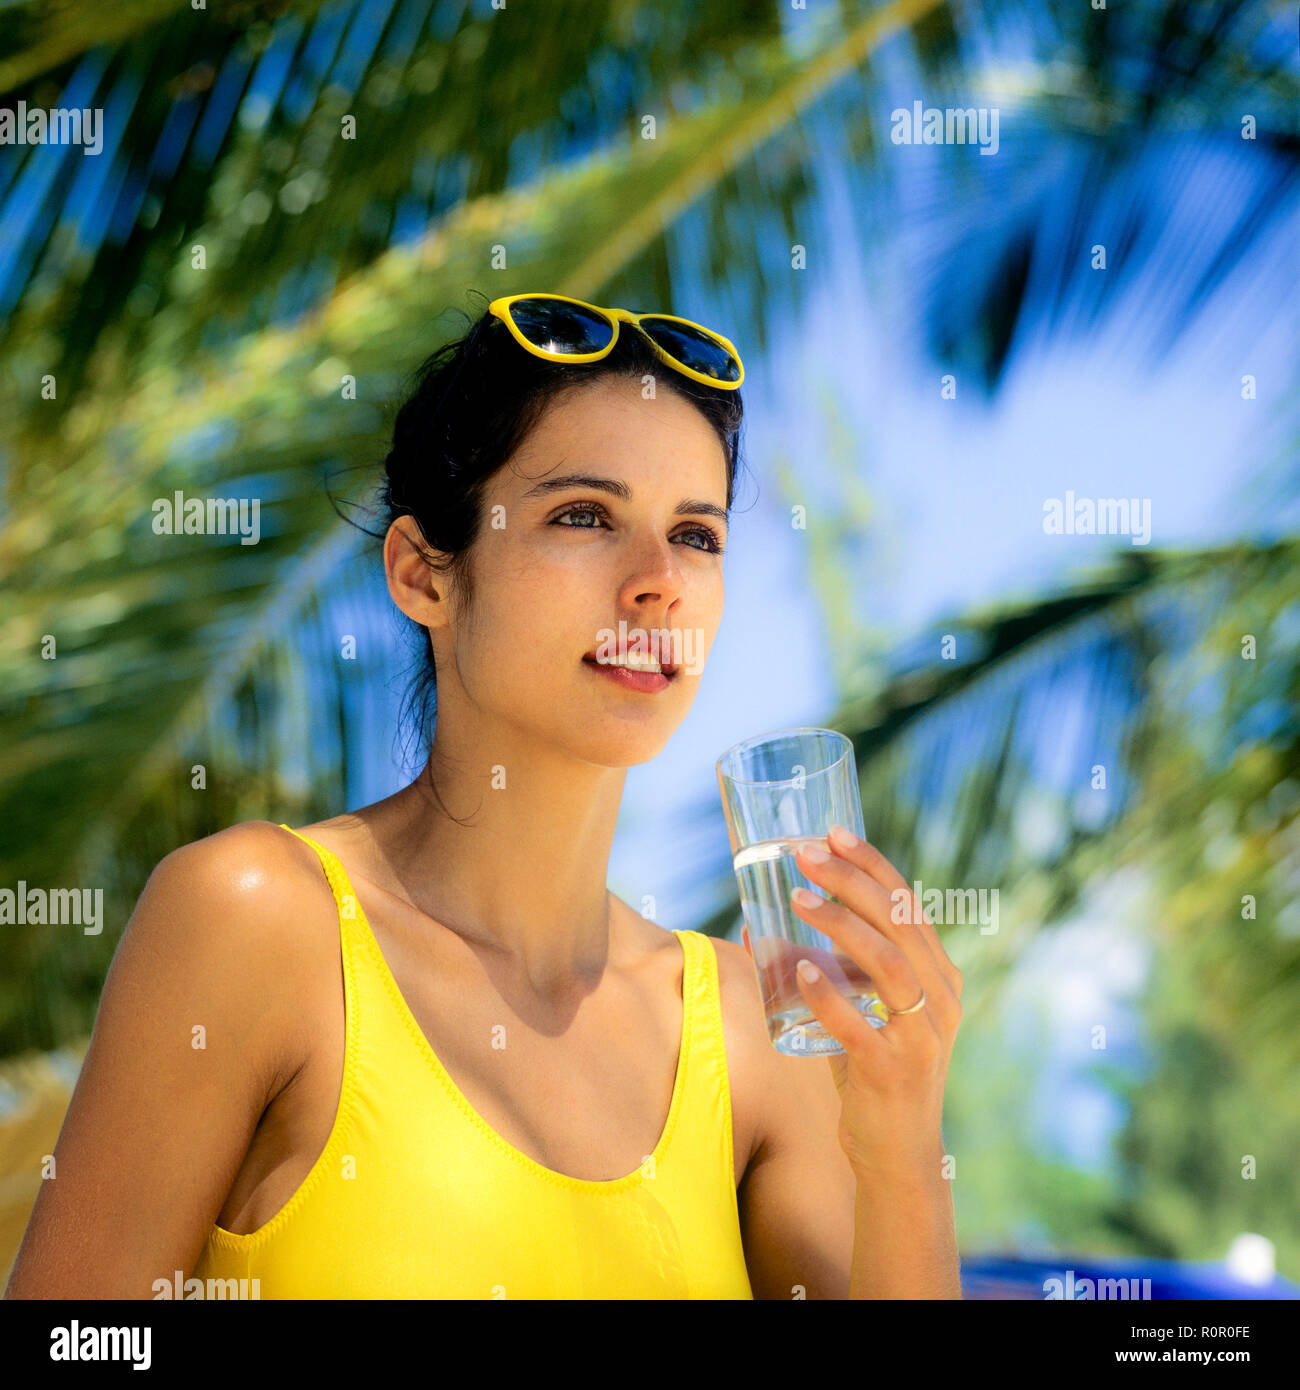 Young woman with yellow swimsuit holding a glass of water, palm trees background, Guadeloupe, French West Indies, Stock Photo